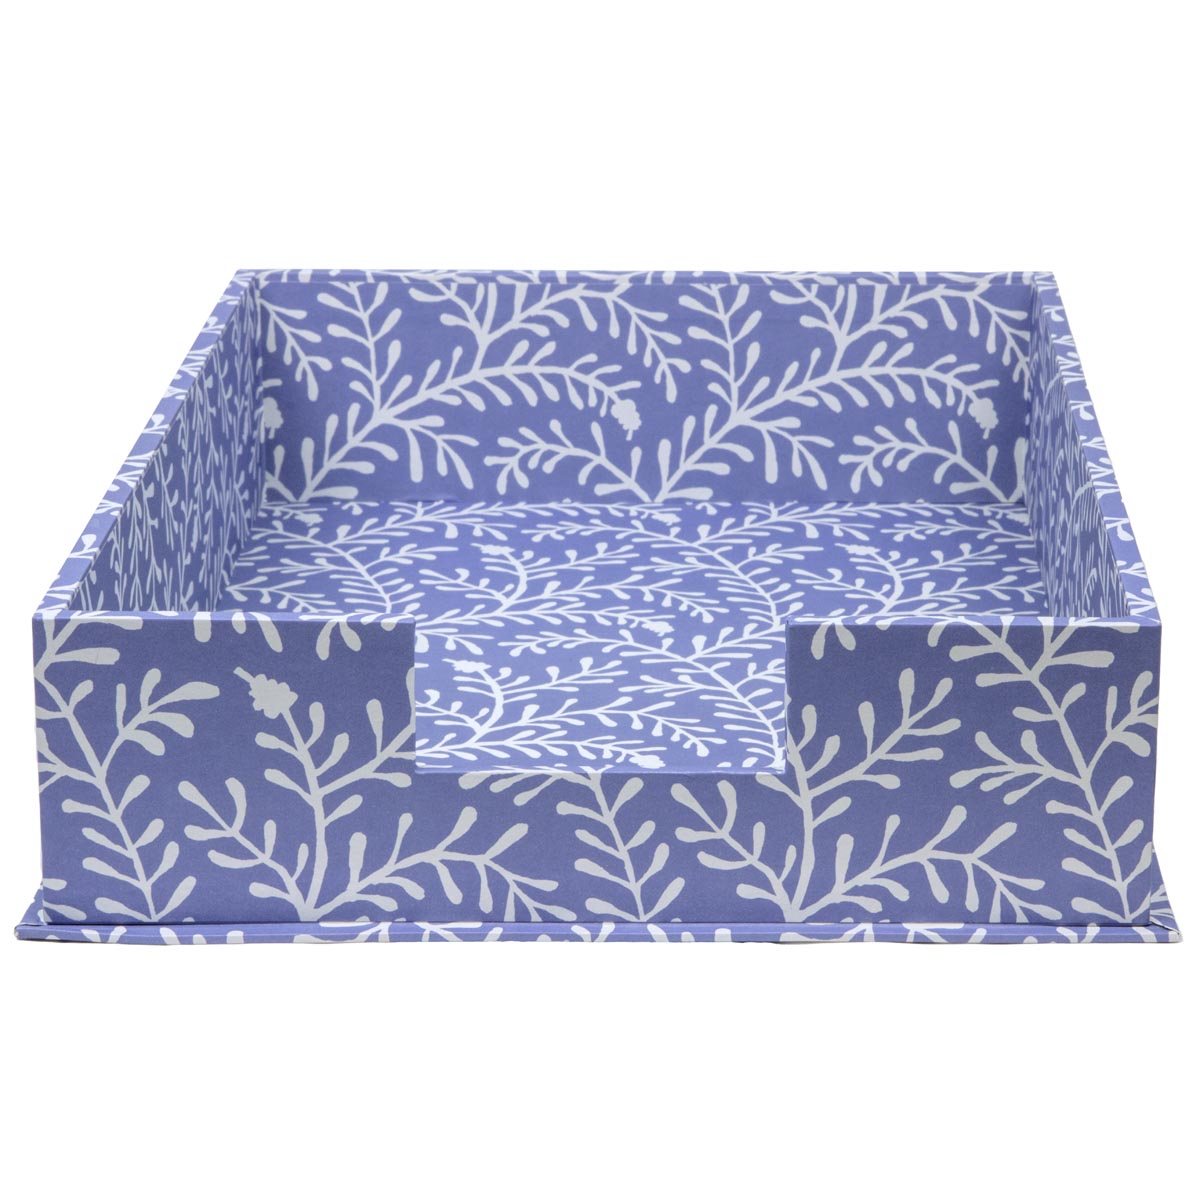 A4 Letter Tray Sprig Harebell